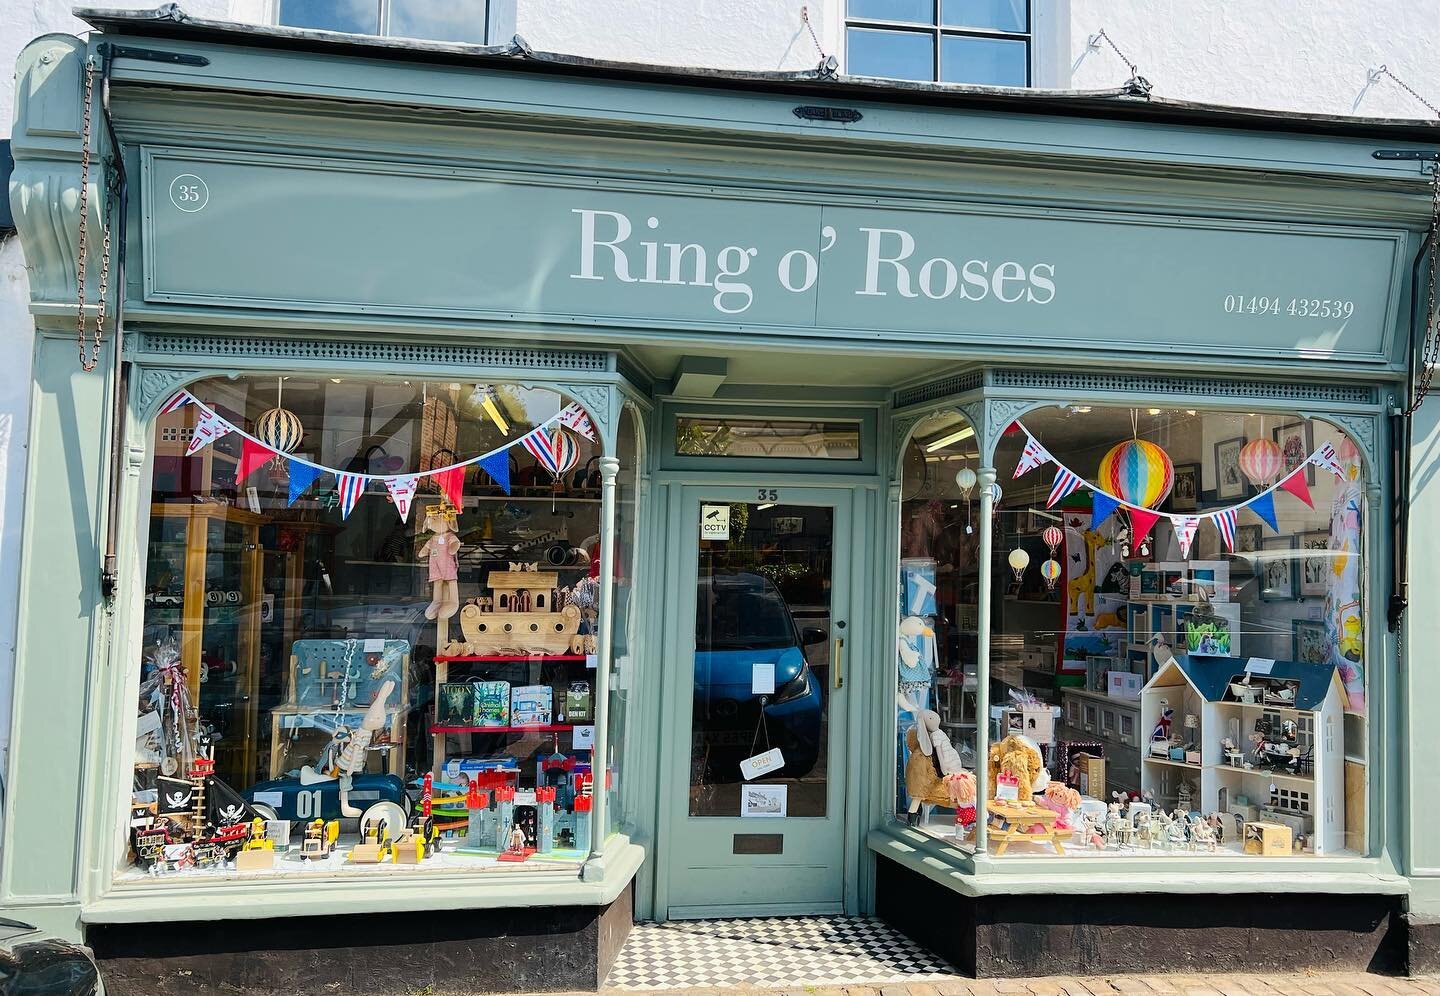 It&rsquo;s a beautiful day in Old Amersham and @ringorosestoys looks particularly pretty! Come over and see us!! X